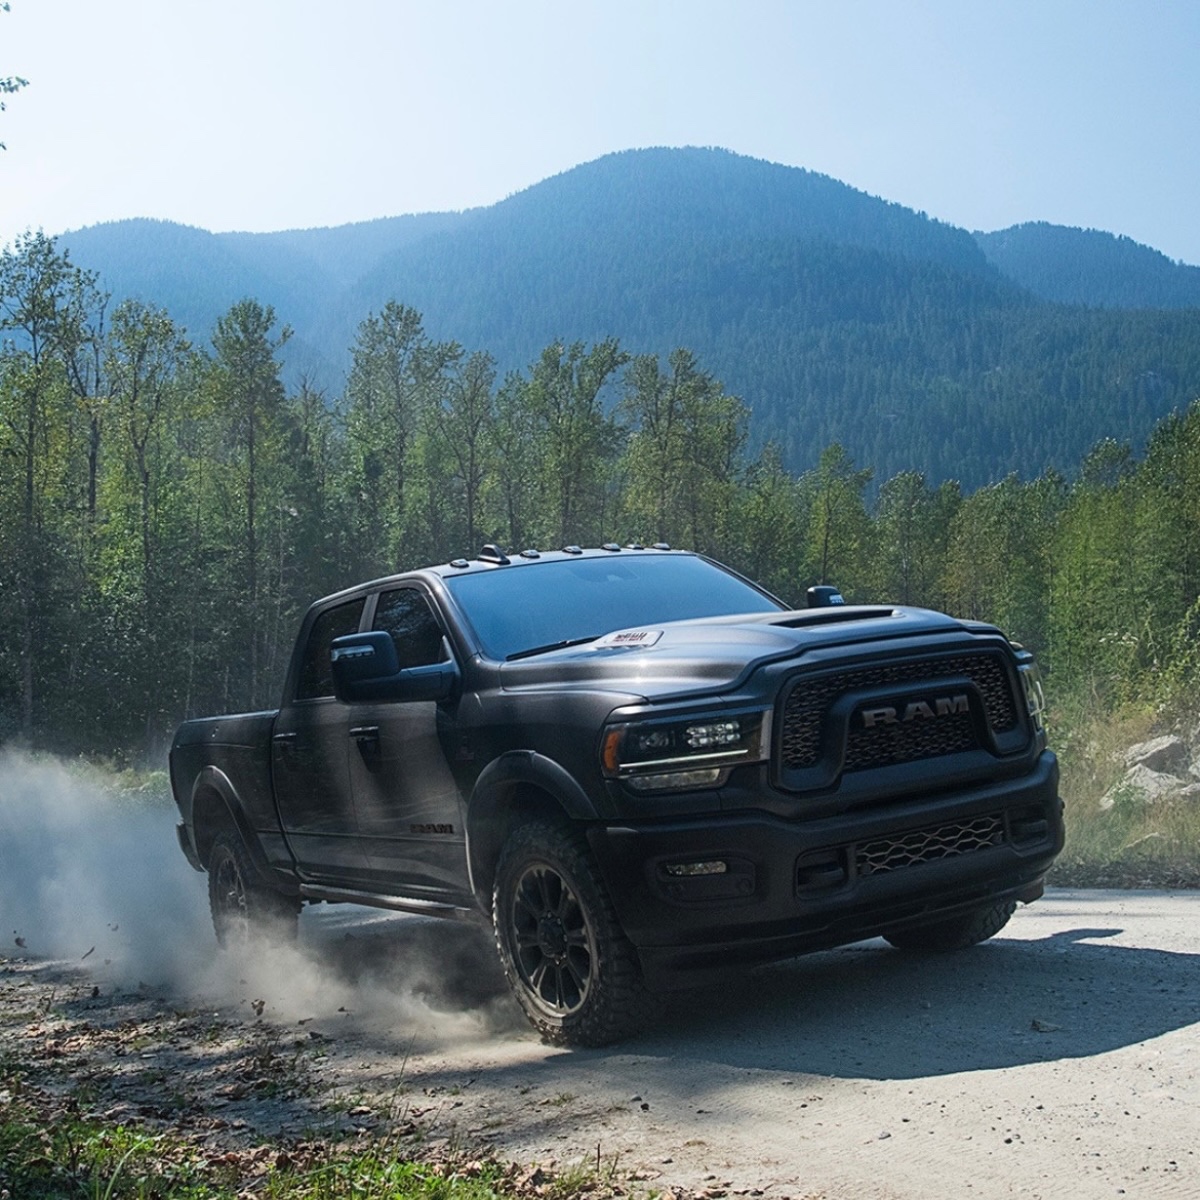 The #Ram2500 is here to transform every journey into an epic tale of style and power. 😎 Get ready to explore new territory with the help of this truck! Are you excited for what adventures lie ahead? 👀 #CarCrushWednesday #Ram #RamUSA